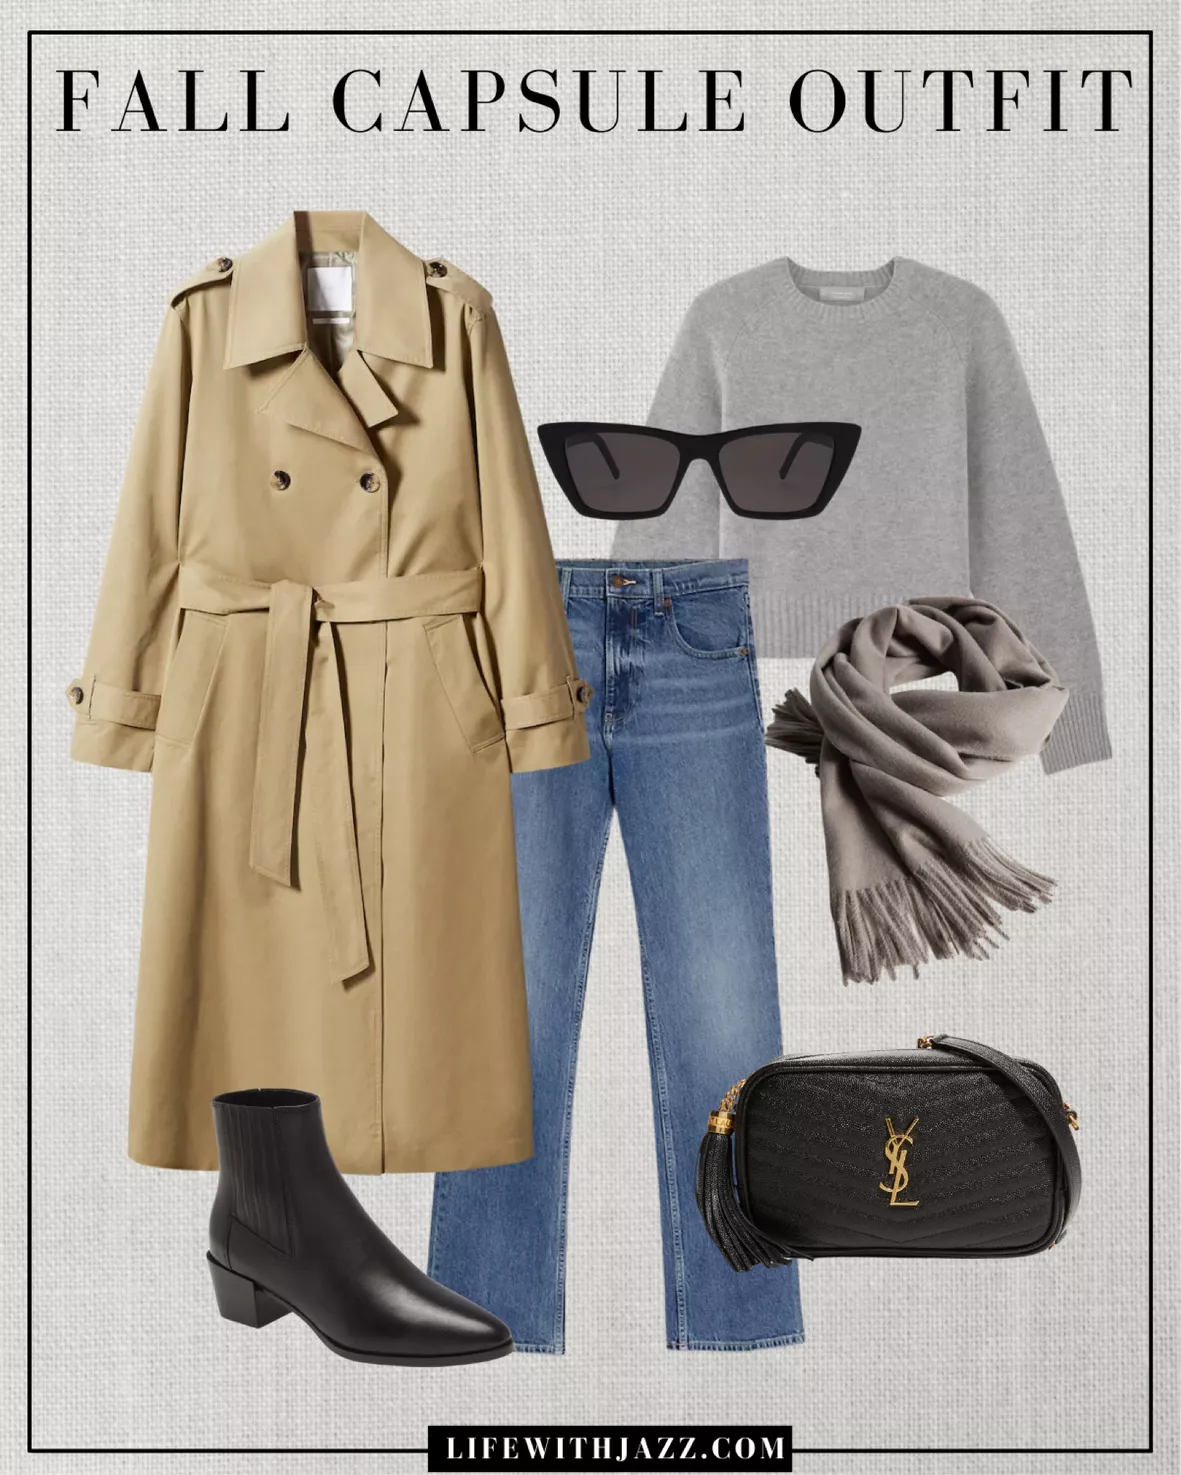 Classic trench coat with belt - Women